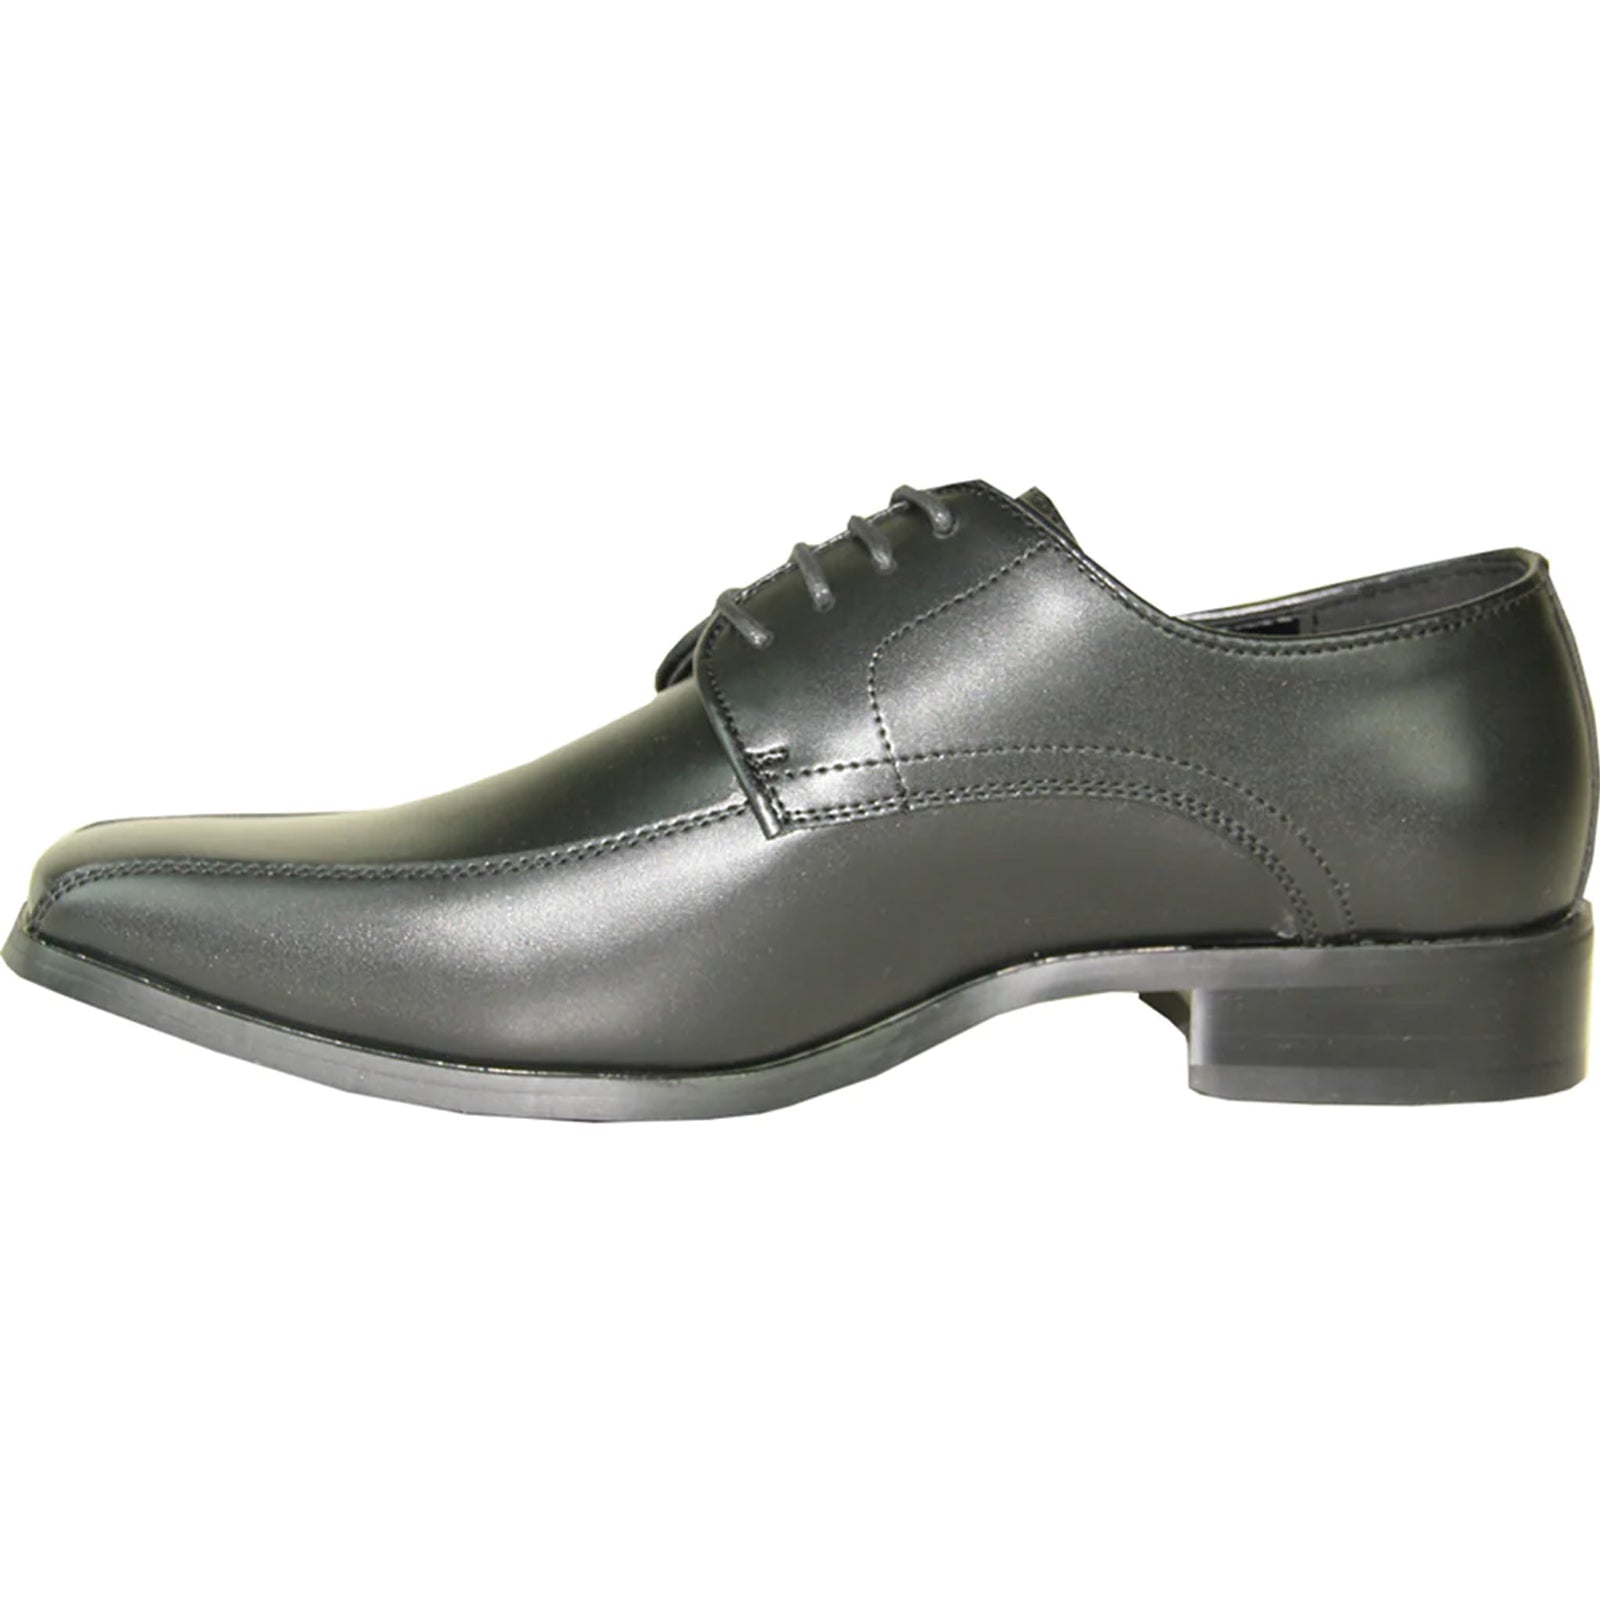 "Black Classic Men's Dress Shoe - Square Pointy Toe Bicycle Style"